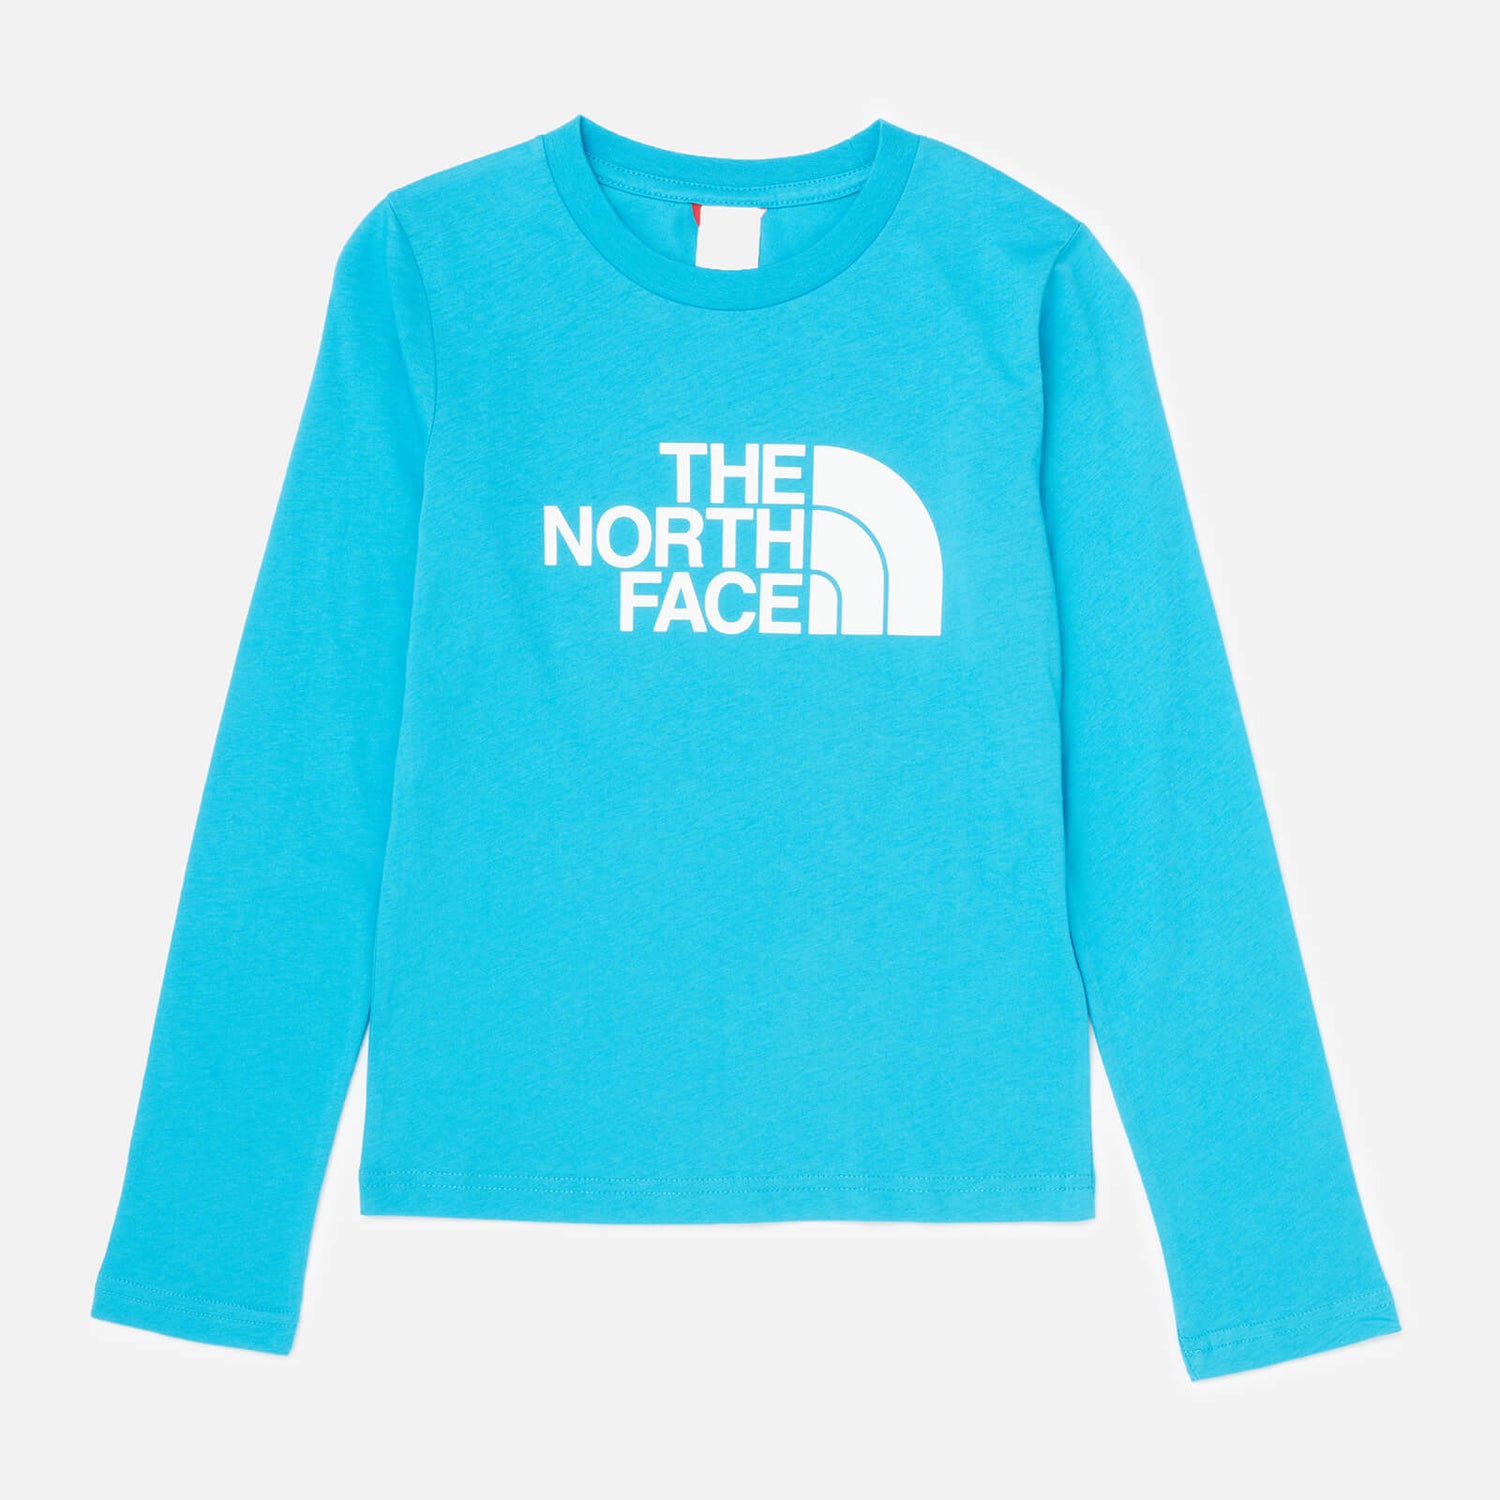 The North Face Boys' Youth Long Sleeve Easy T-Shirt - Blue